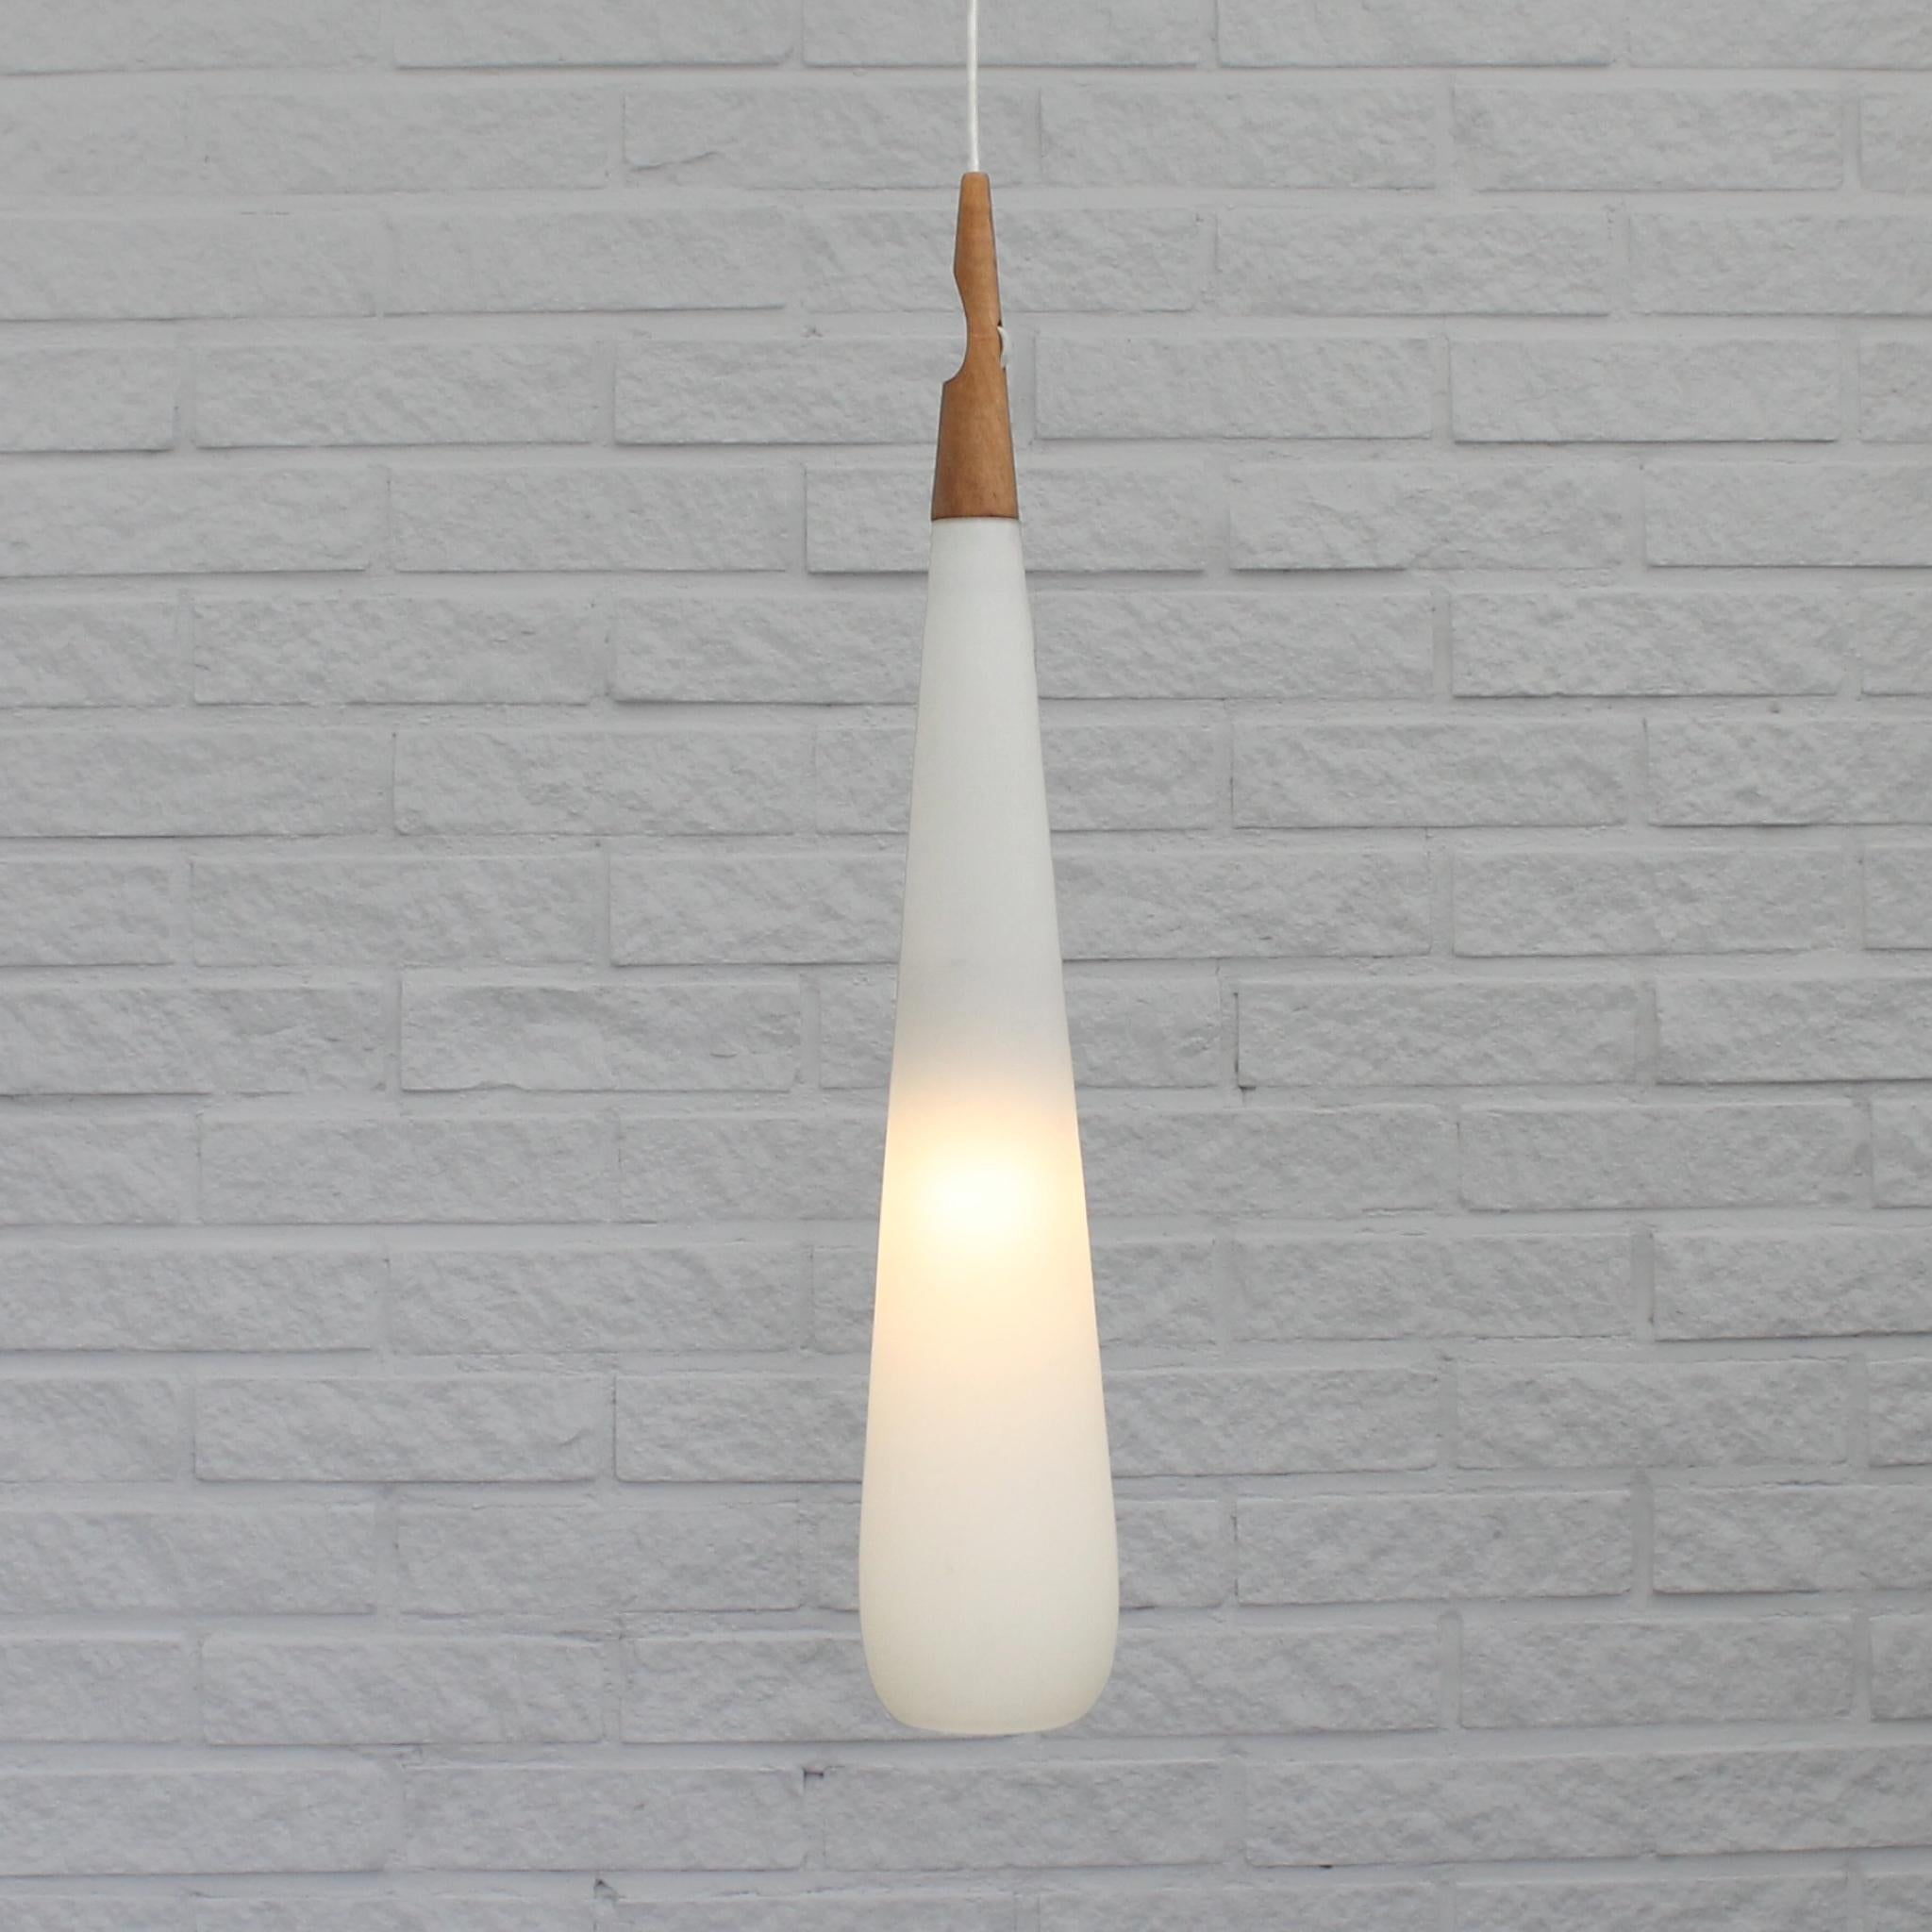 Large drop-shaped pendant lamp, model 546 ‘Baton’, designed by the Swedish brothers Uno & Östen Kristiansson for Luxus in Vittsjö. It features an elongated opaline glass shade and a wooden fixture with an integrated cable shortener. This oversized